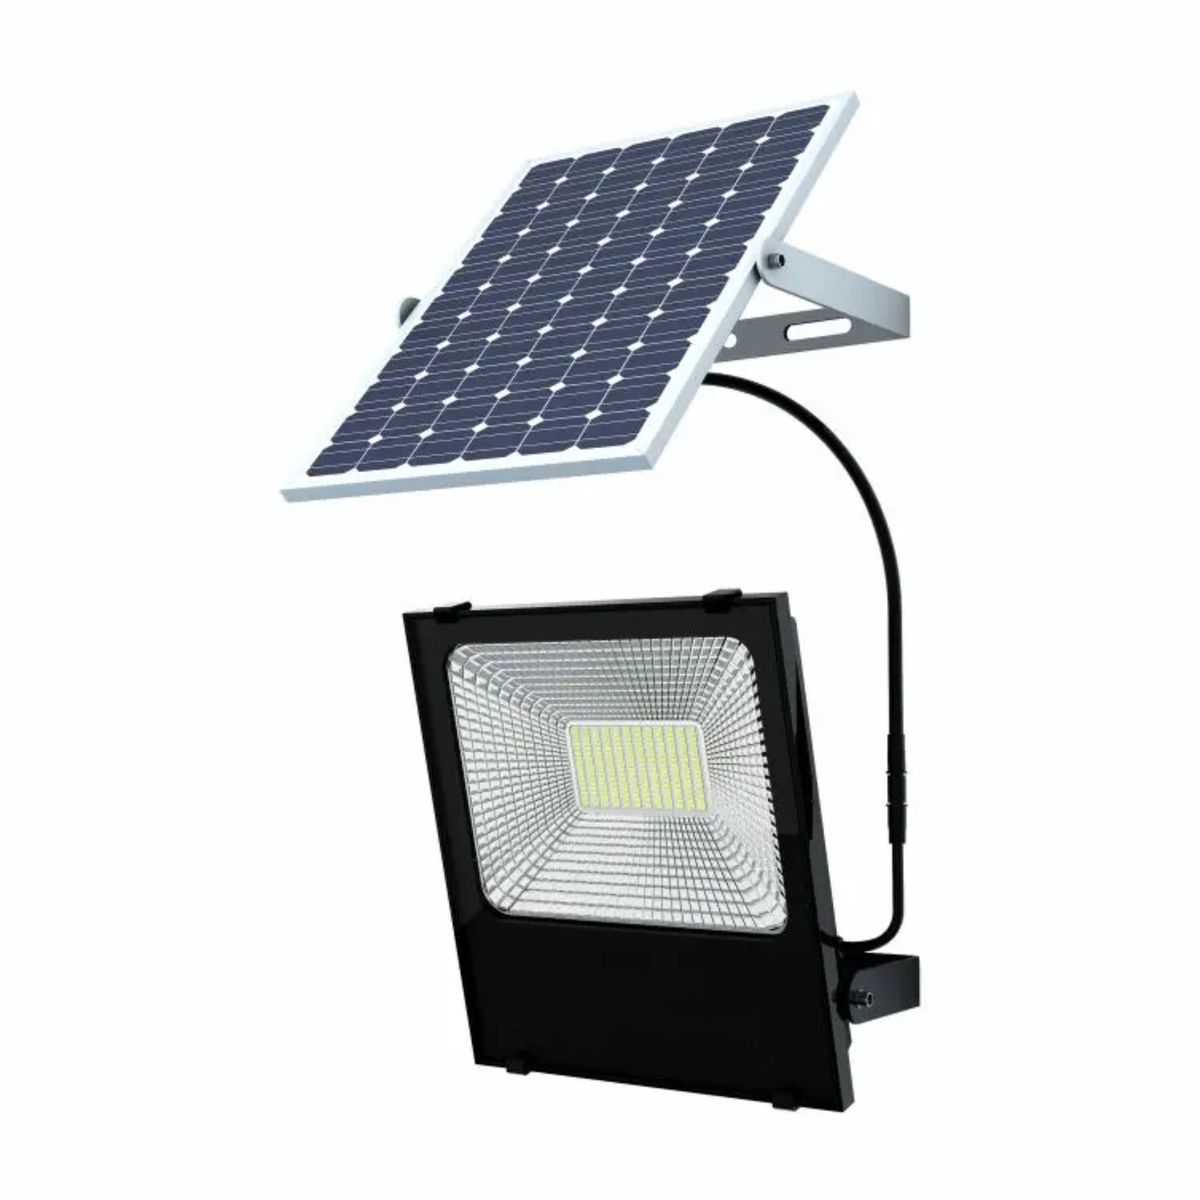 Led Solar Floodlight And Panel 20w Shop Today Get It Tomorrow